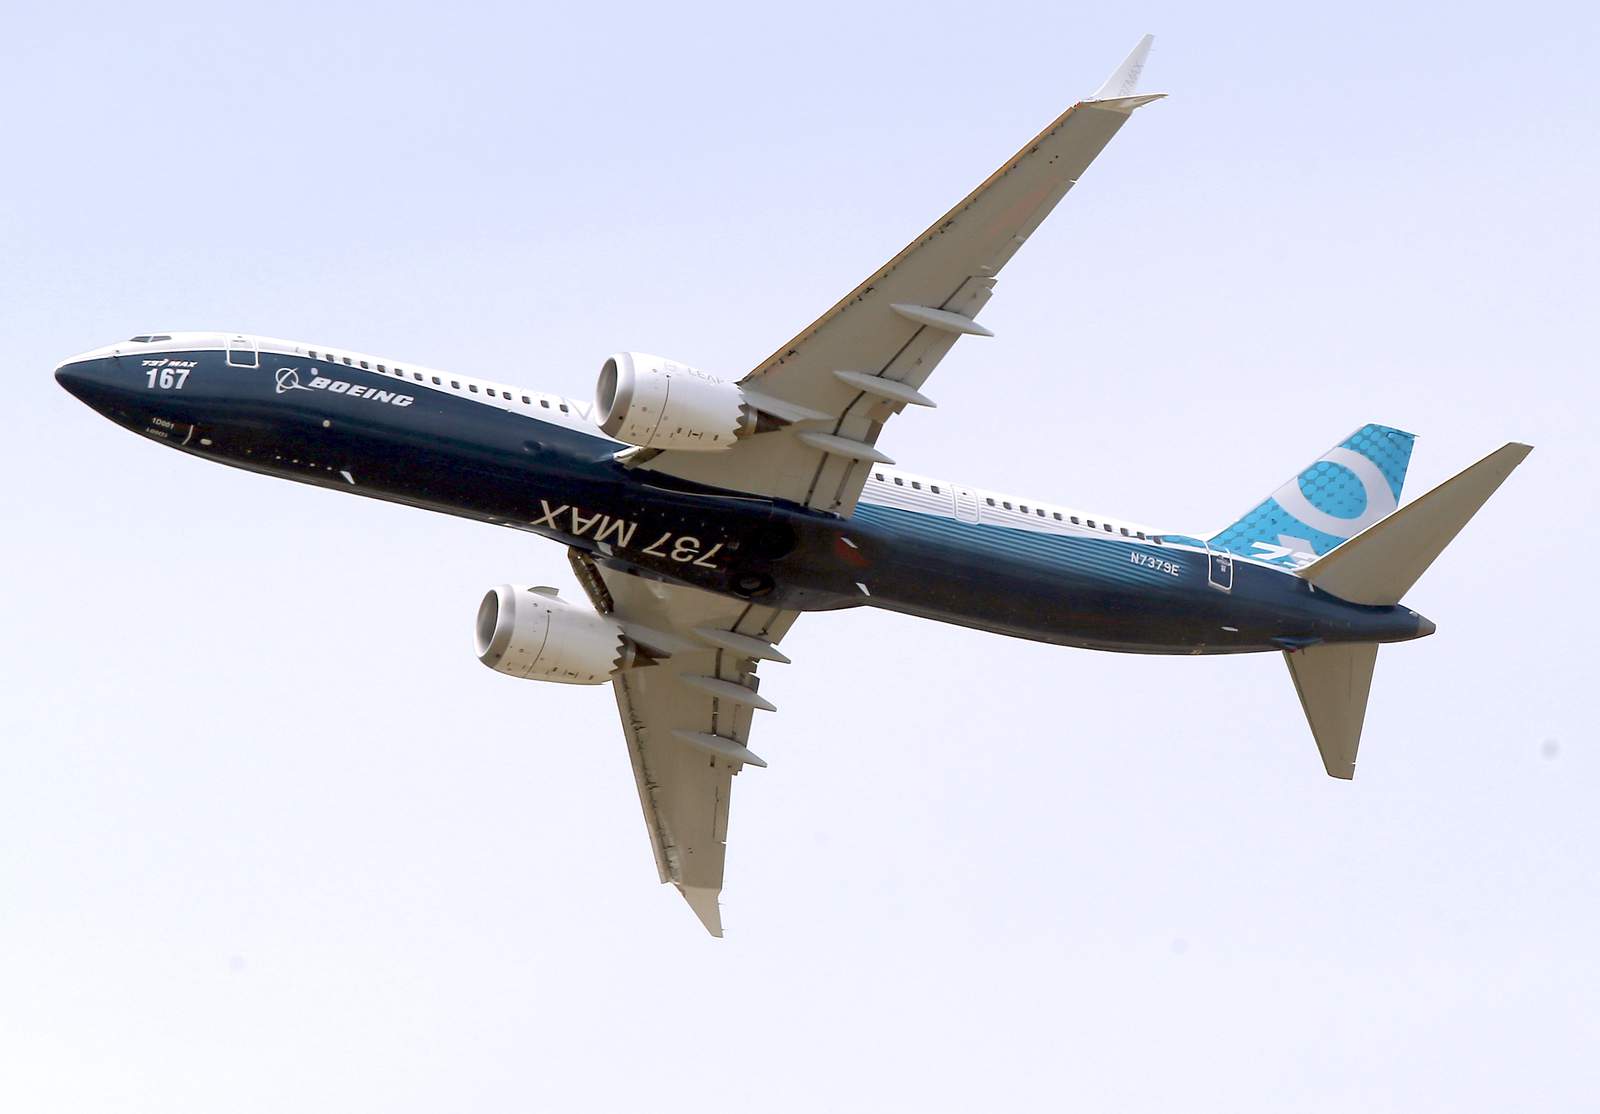 European regulator moves to clear Boeing 737 for flight